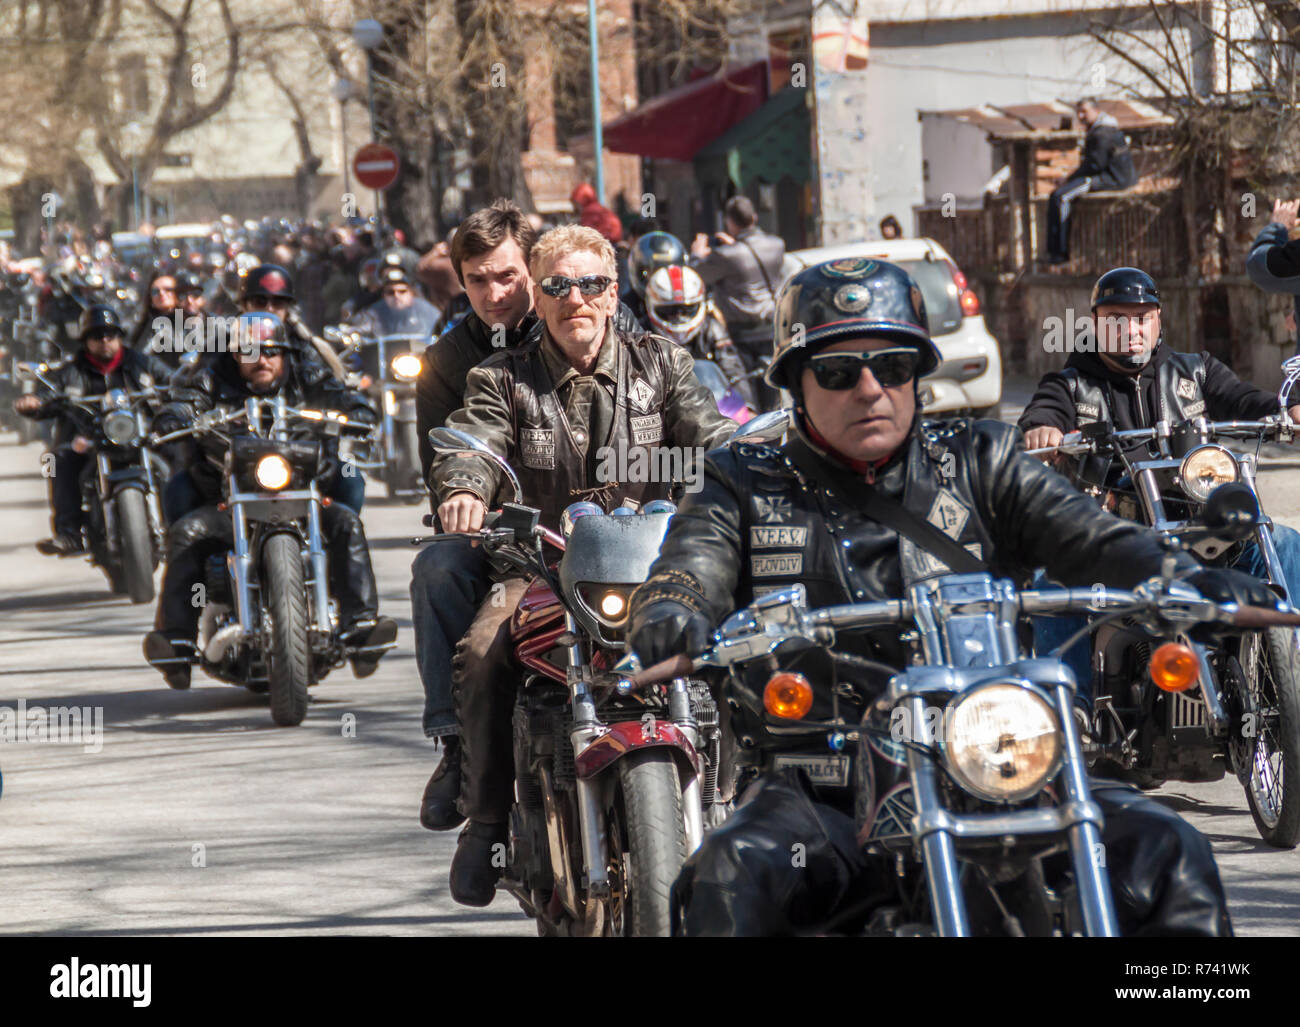 PLOVDIV, BULGARIA - MARCH 22, 2015 - Motorcycle season opening 22 March 2015. Annual motorbike fans meeting and parade. Stock Photo